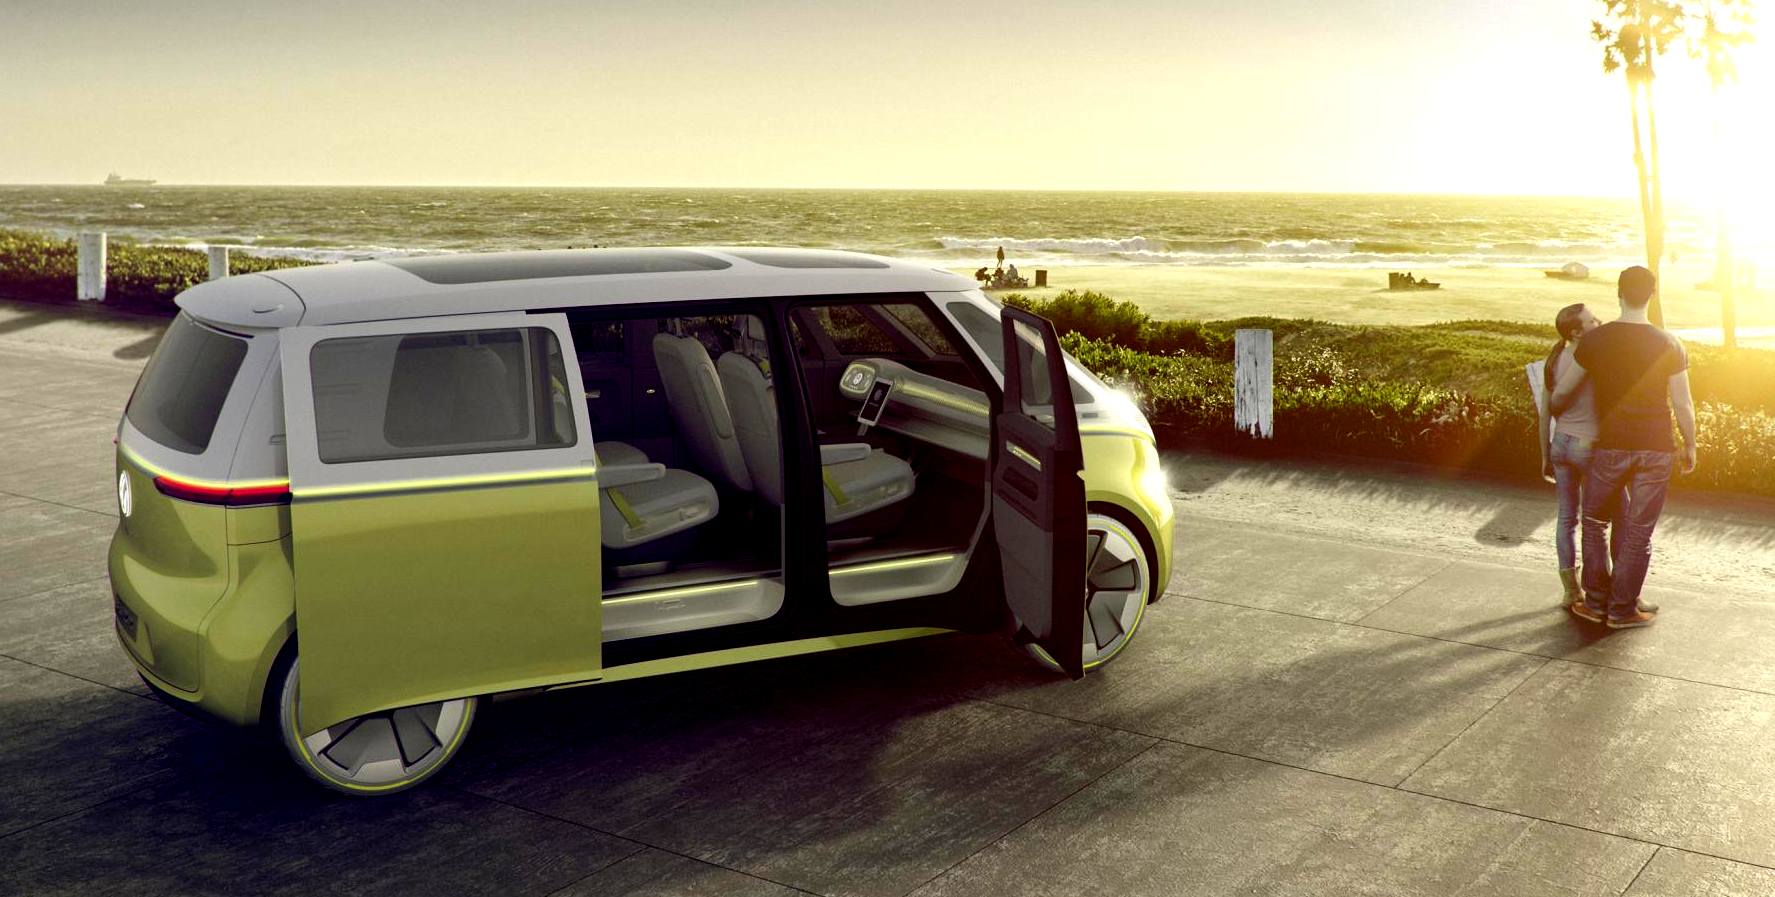 VW T6 electrically powered camper bus